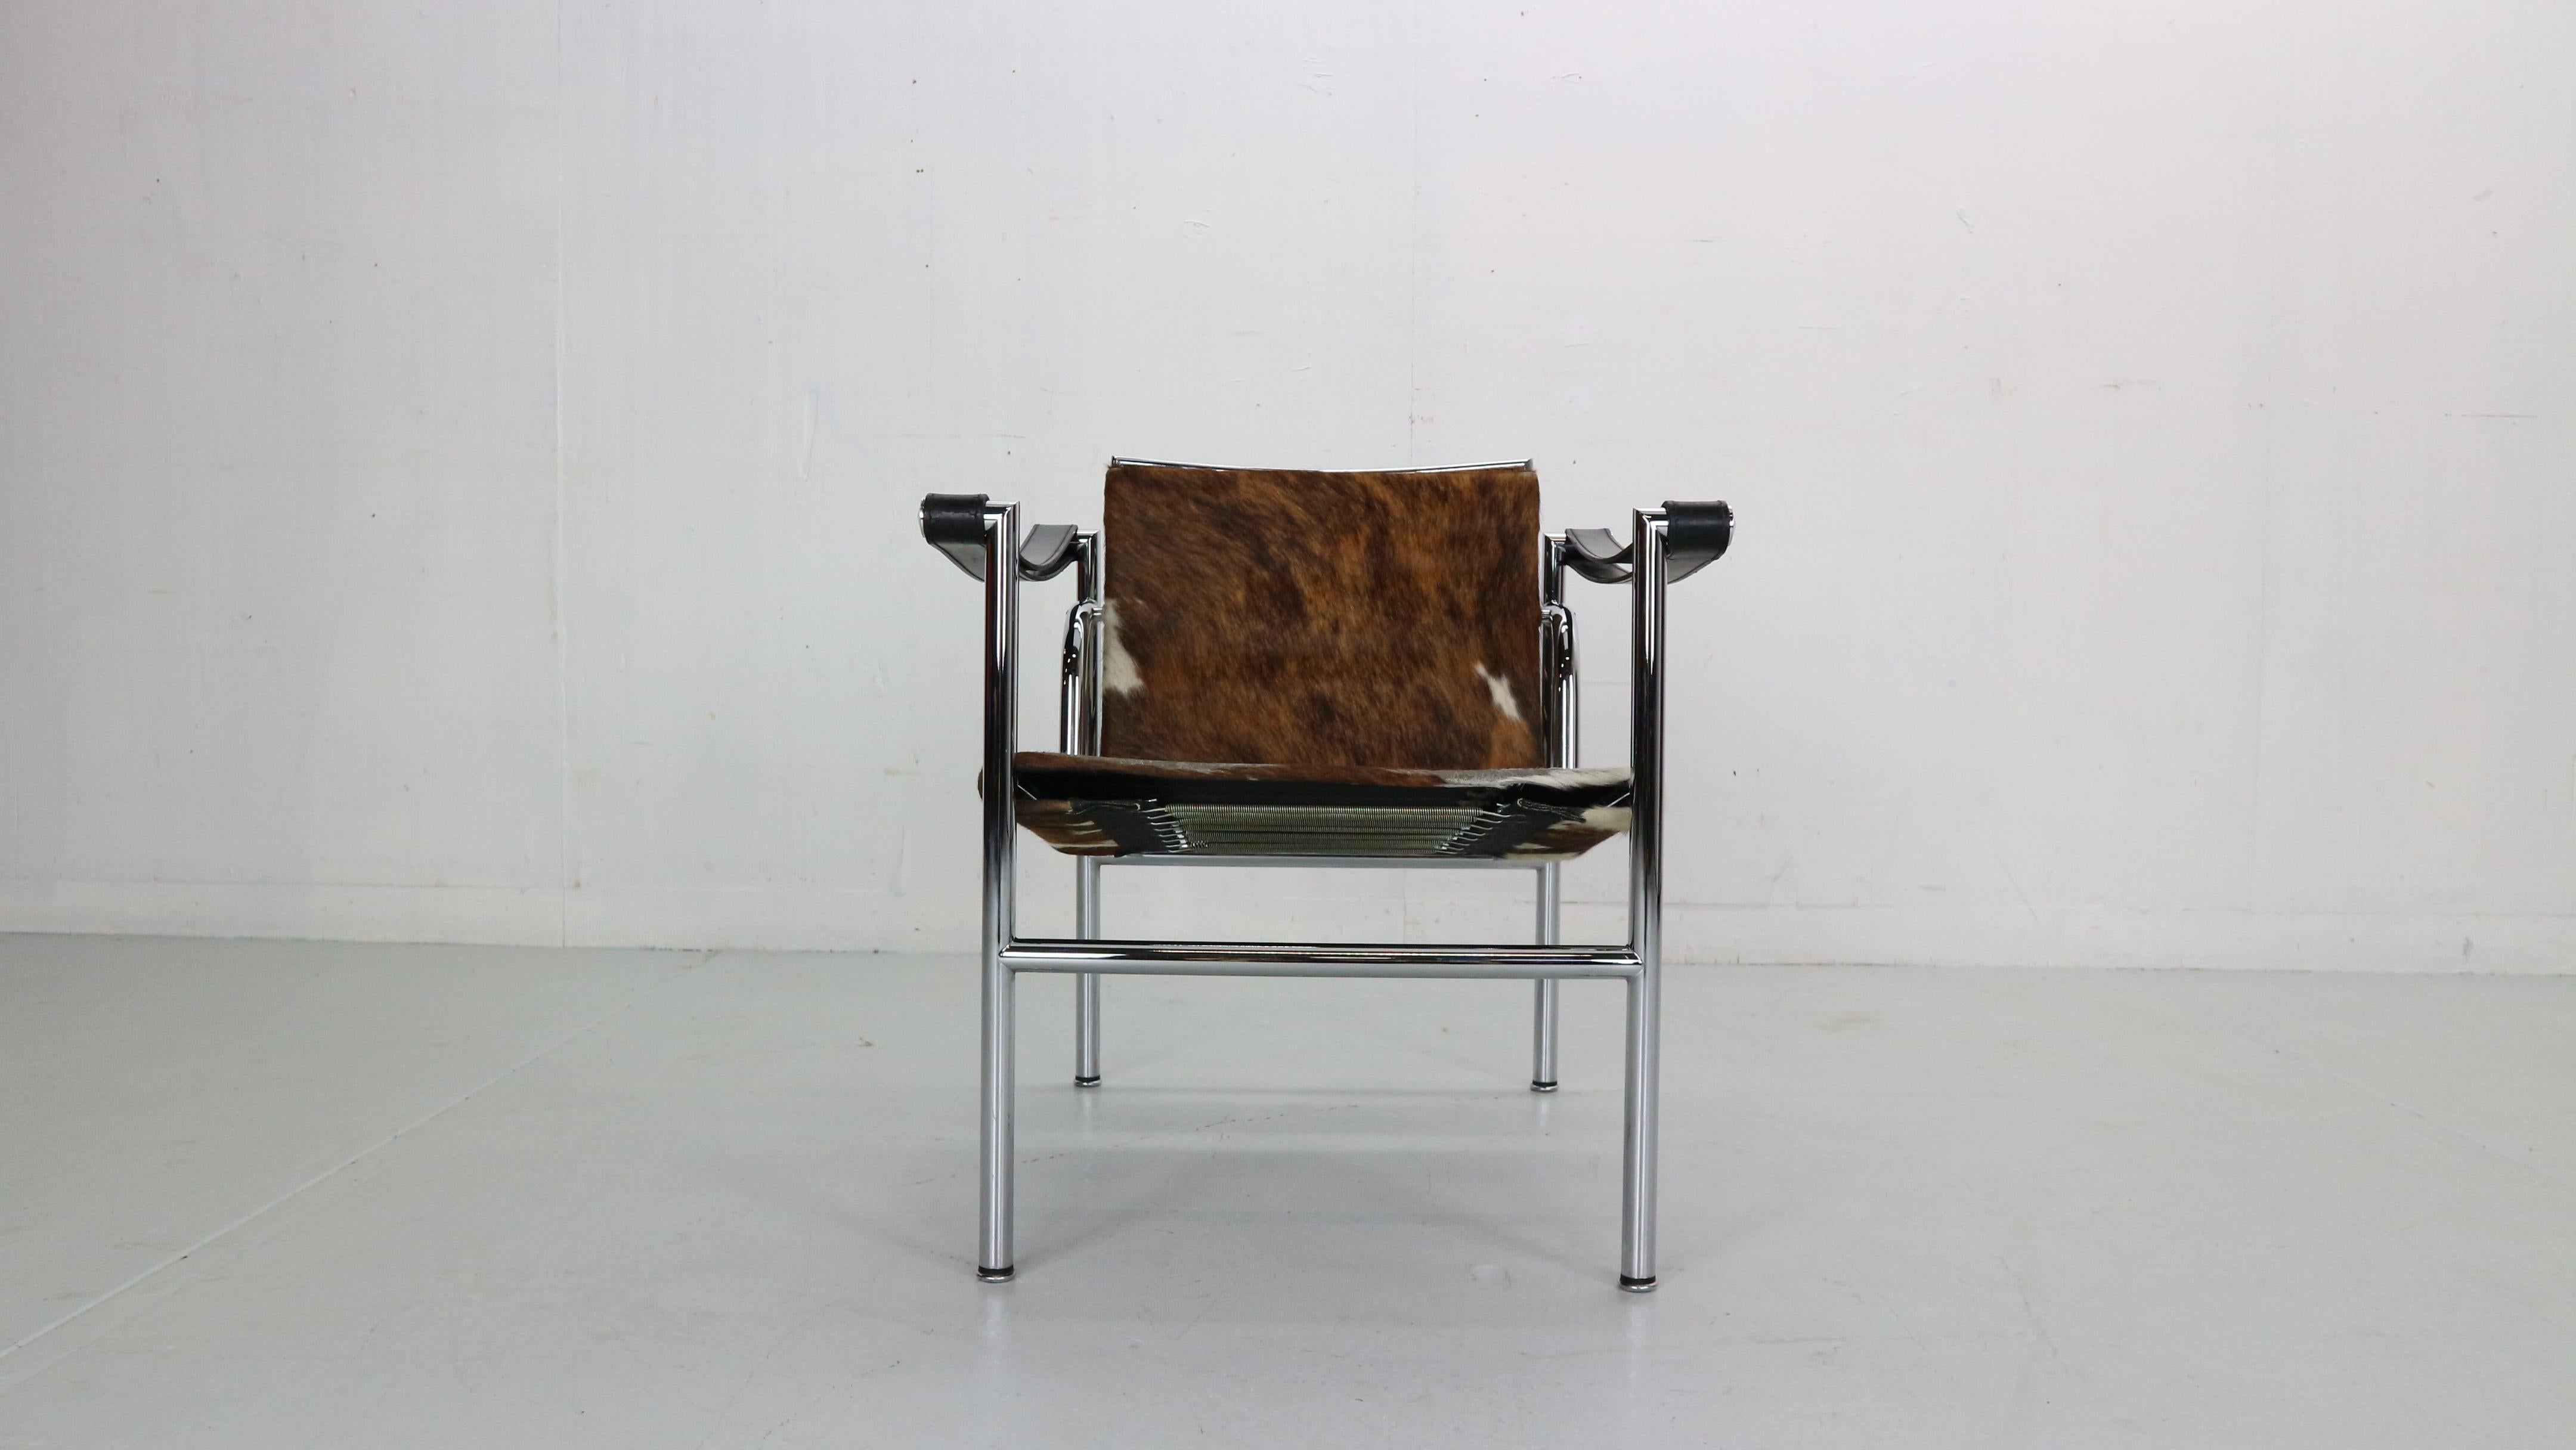 Armchair designed by Le Corbusier, Pierre Jeanneret and Charlotte Perriand and manufactured for Cassina, famous Italian furniture manufacture in 1970s period.
Model number LC1, originally signed on the frame of the chair.
Chrome tubular frame and